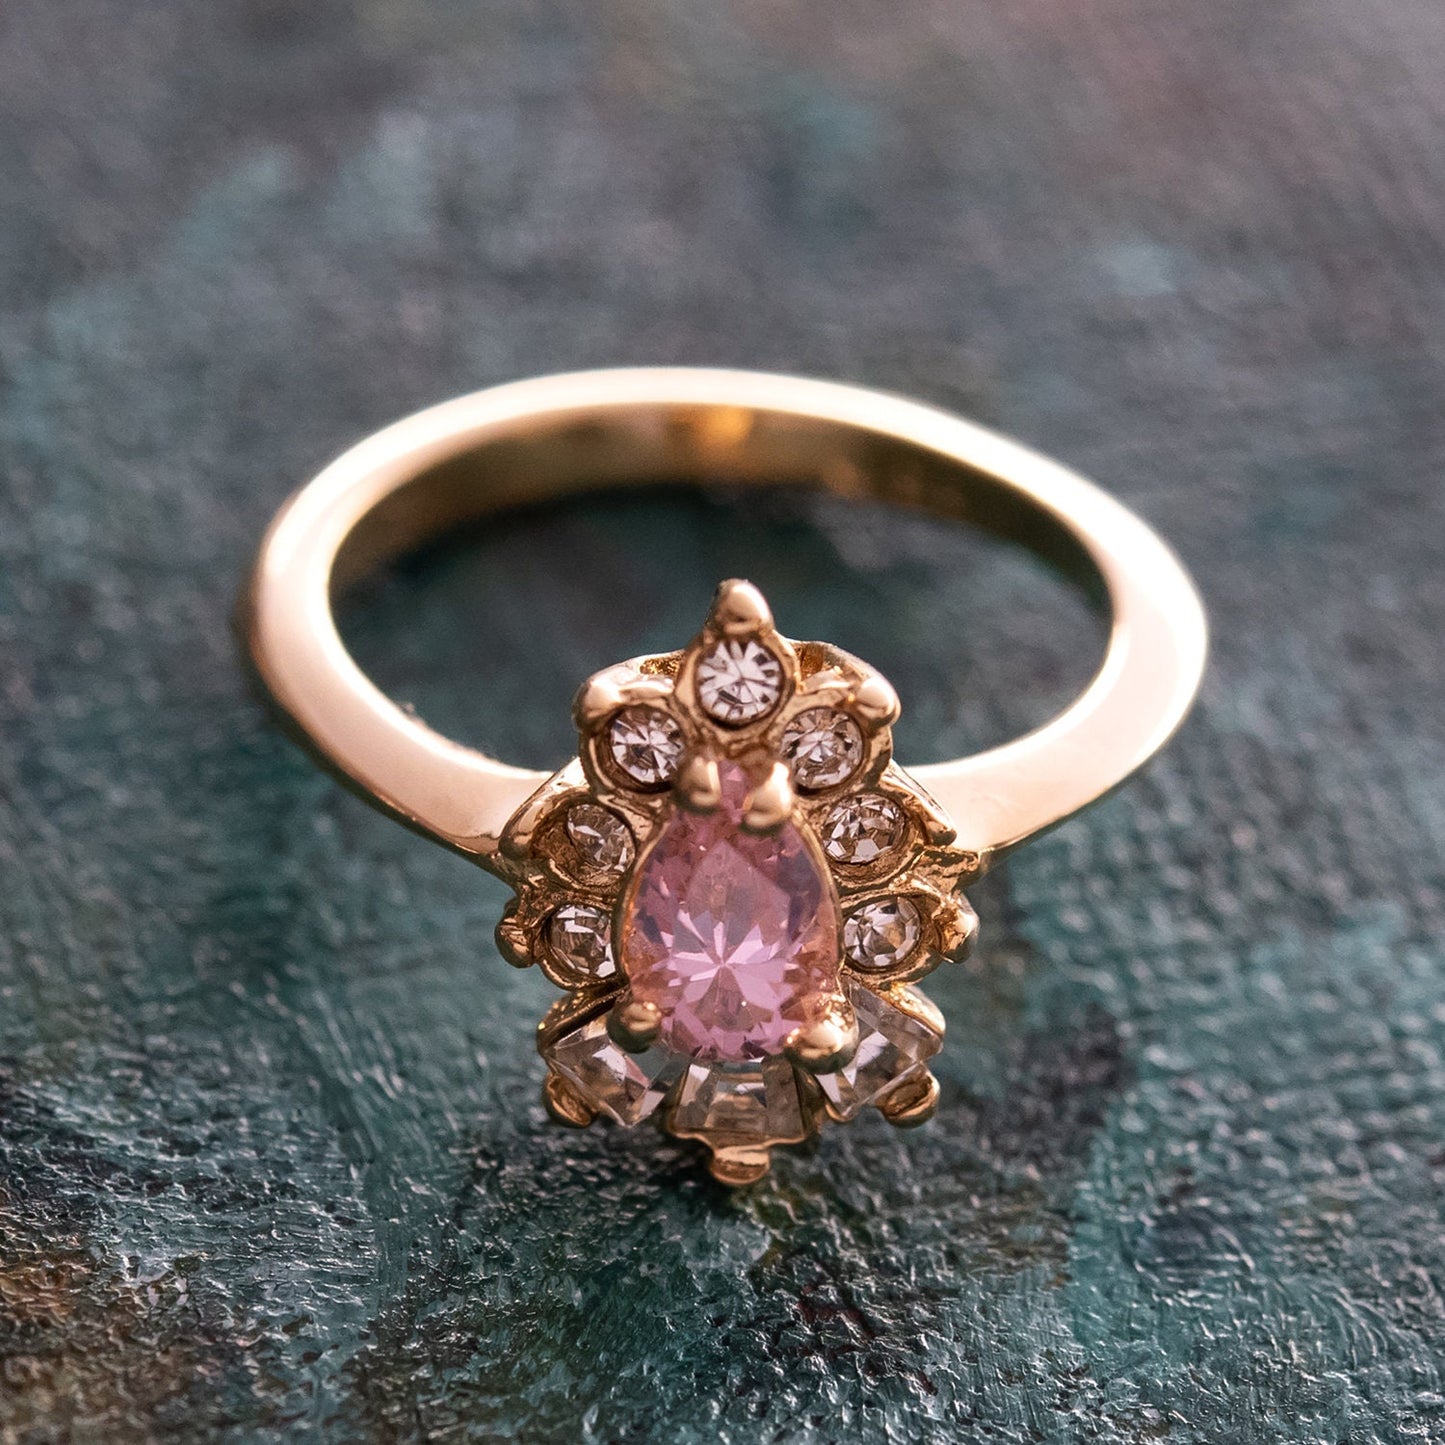 Vintage Ring 1990's Pink Tourmaline Cubic Zirconia and Clear Swarovski Crystals 18k Gold Plated Ring R3093